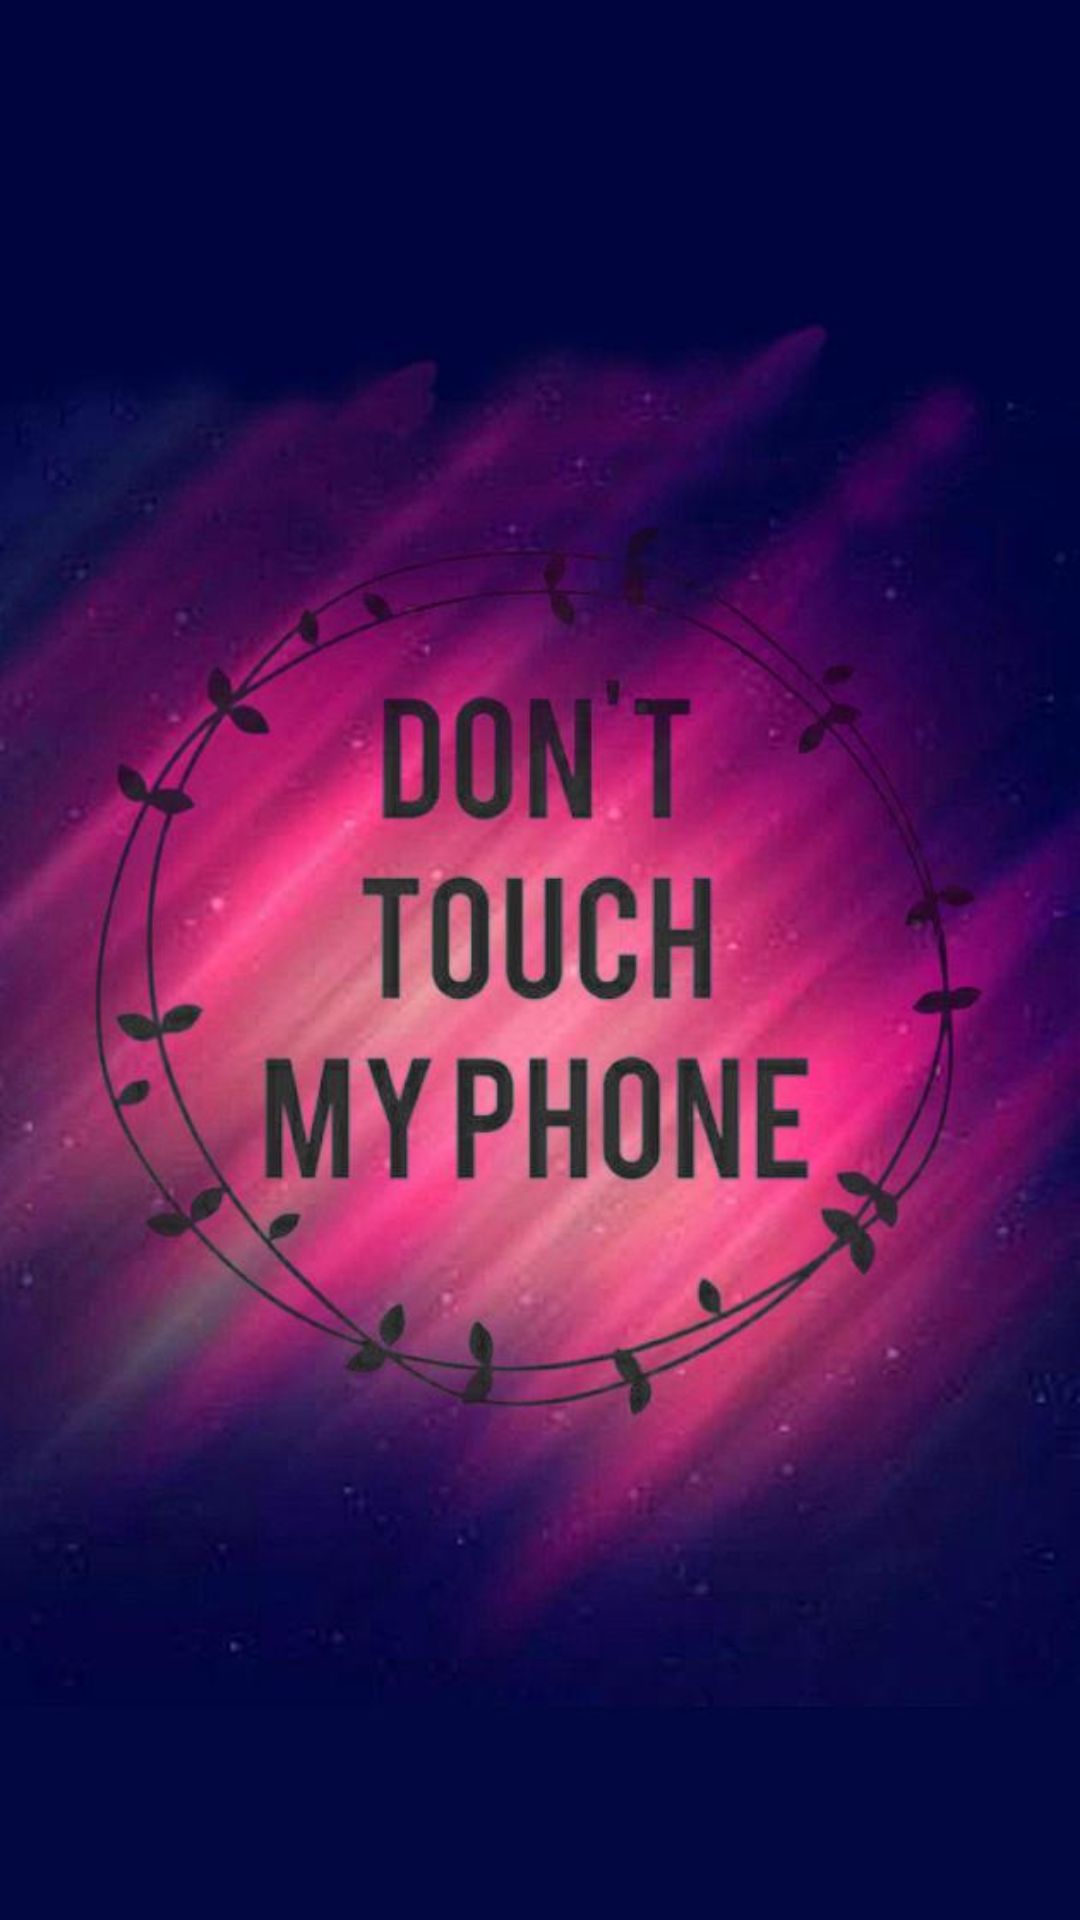 Dont Touch My Phone Full HD Wallpaper